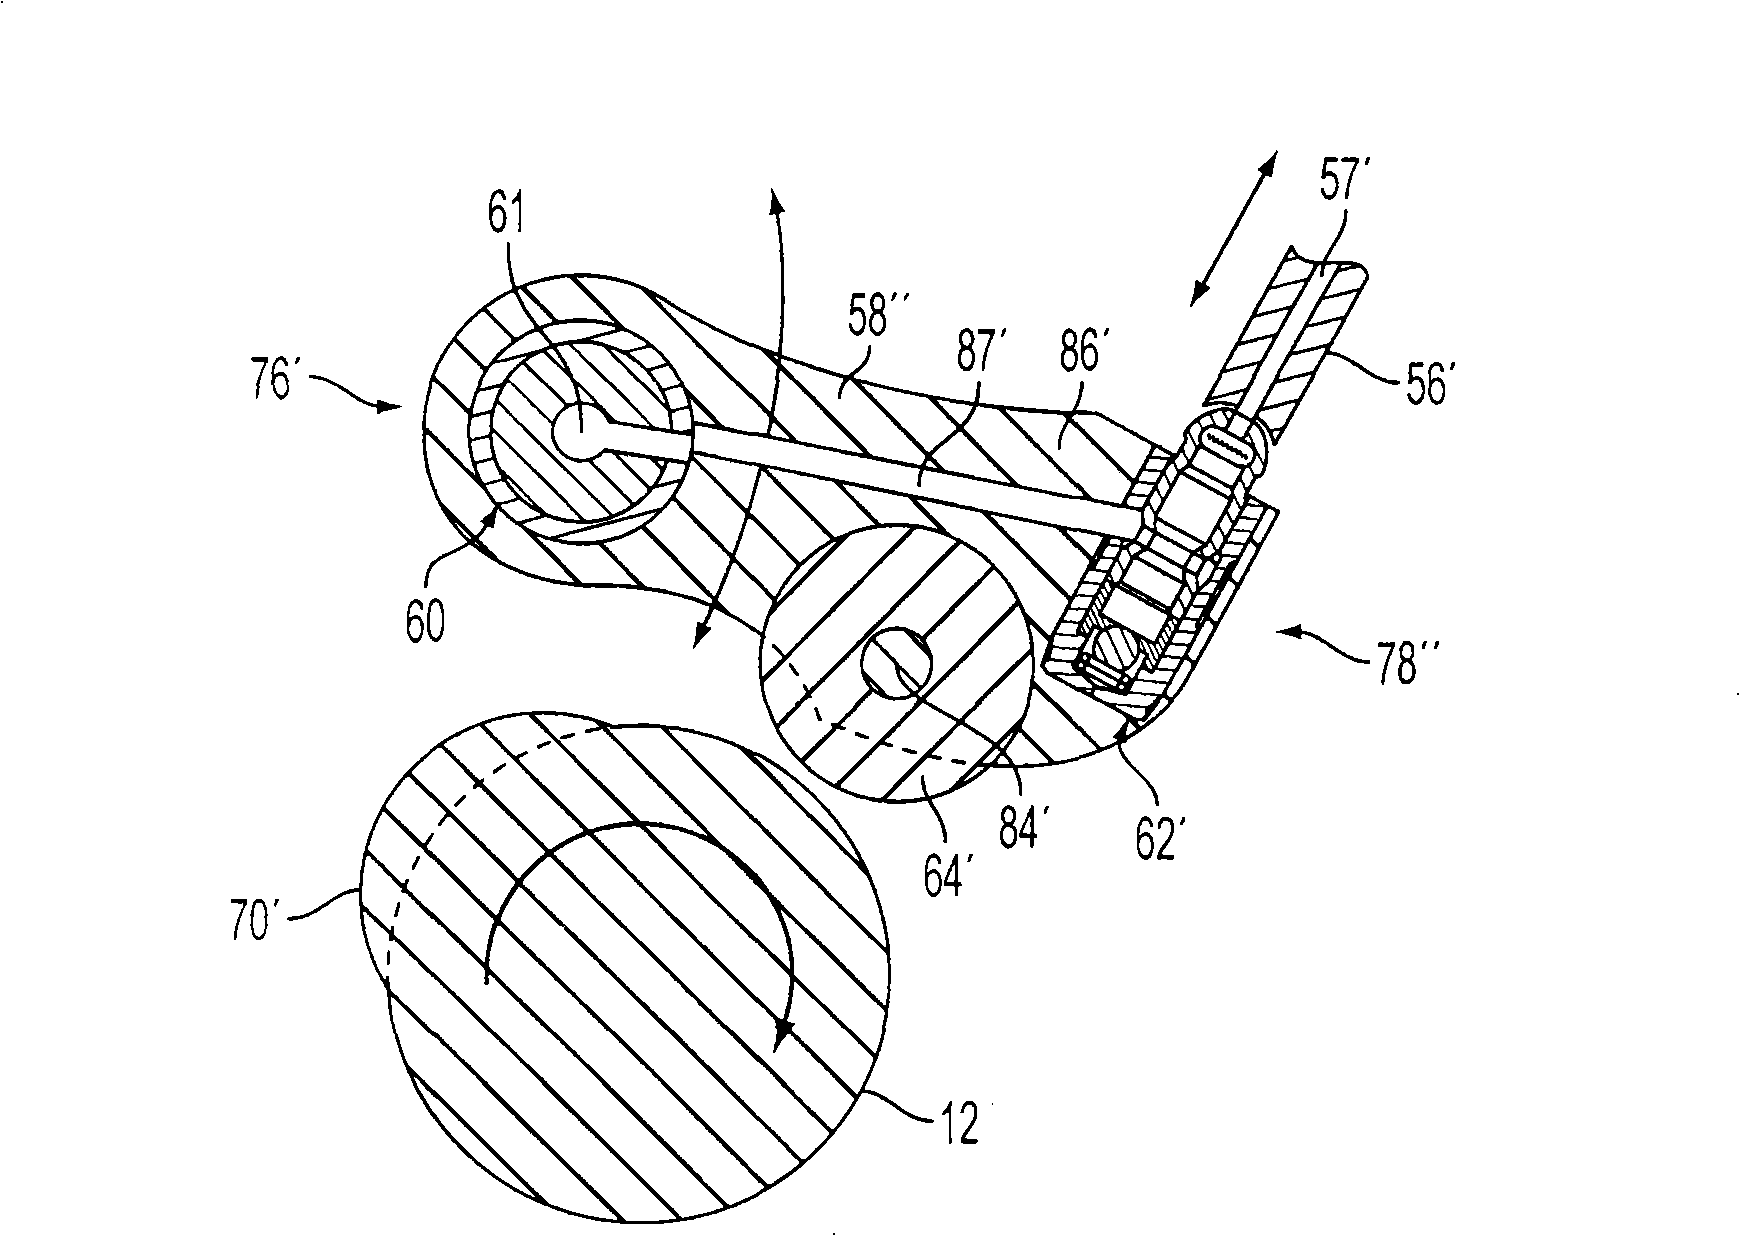 Engine/valvetrain with shaft-mounted cam followers having dual independent lash adjusters